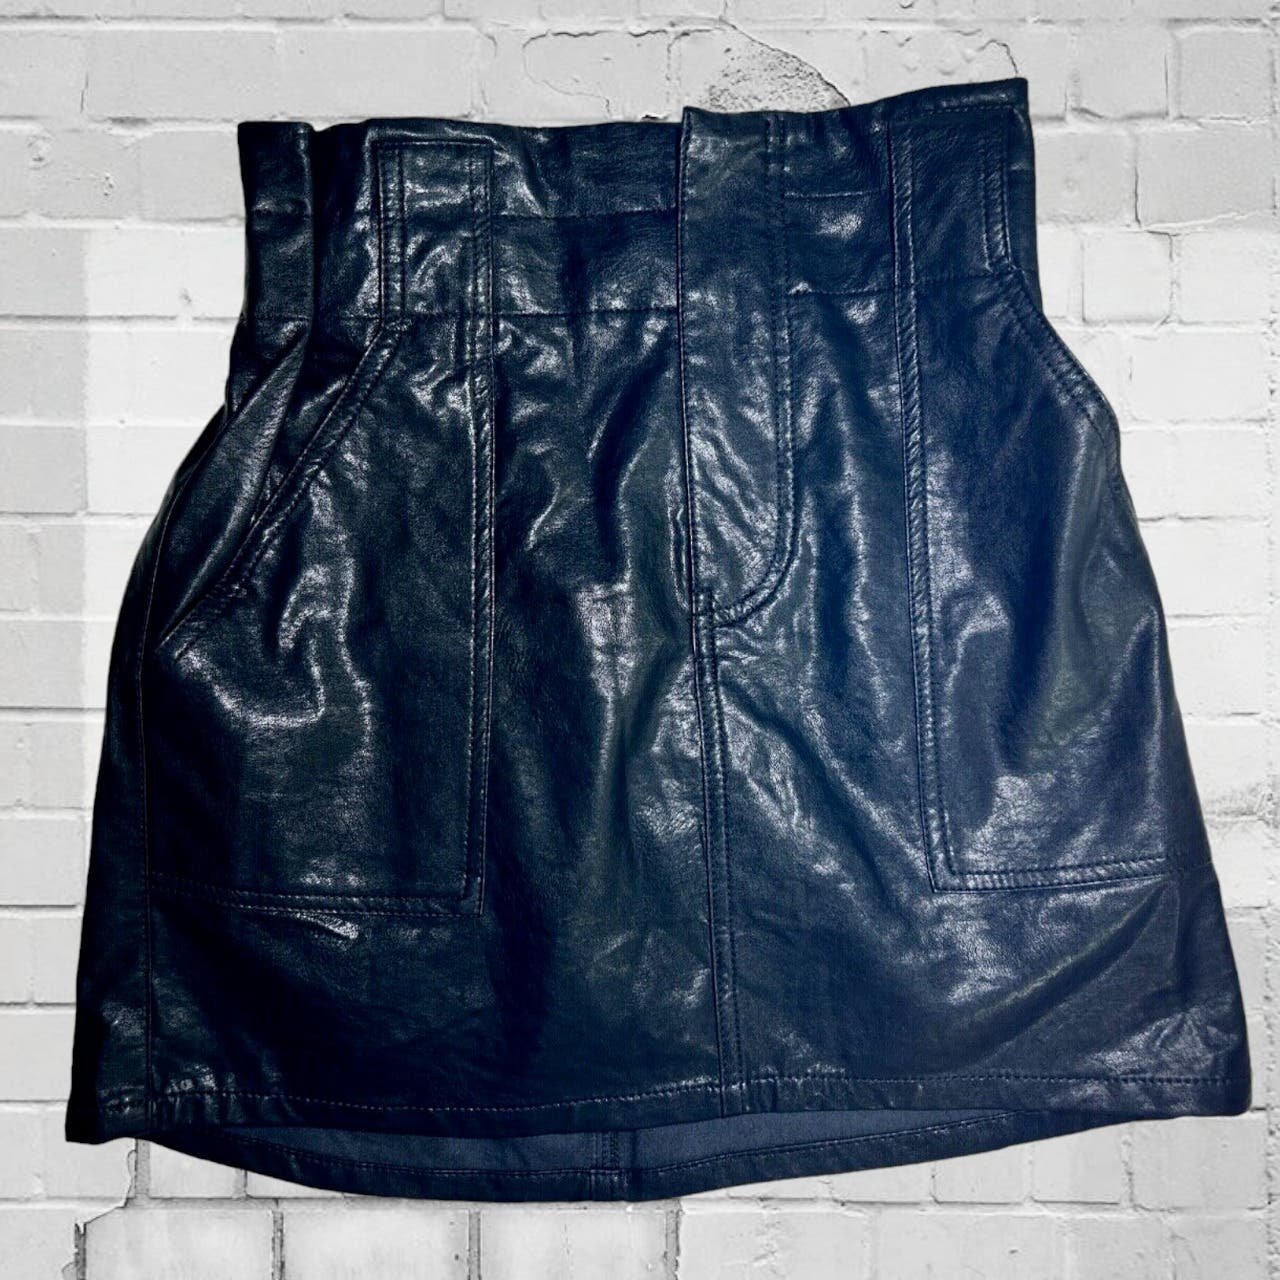 Discounted Black Mini Skirt Faux Leather Size Small by 